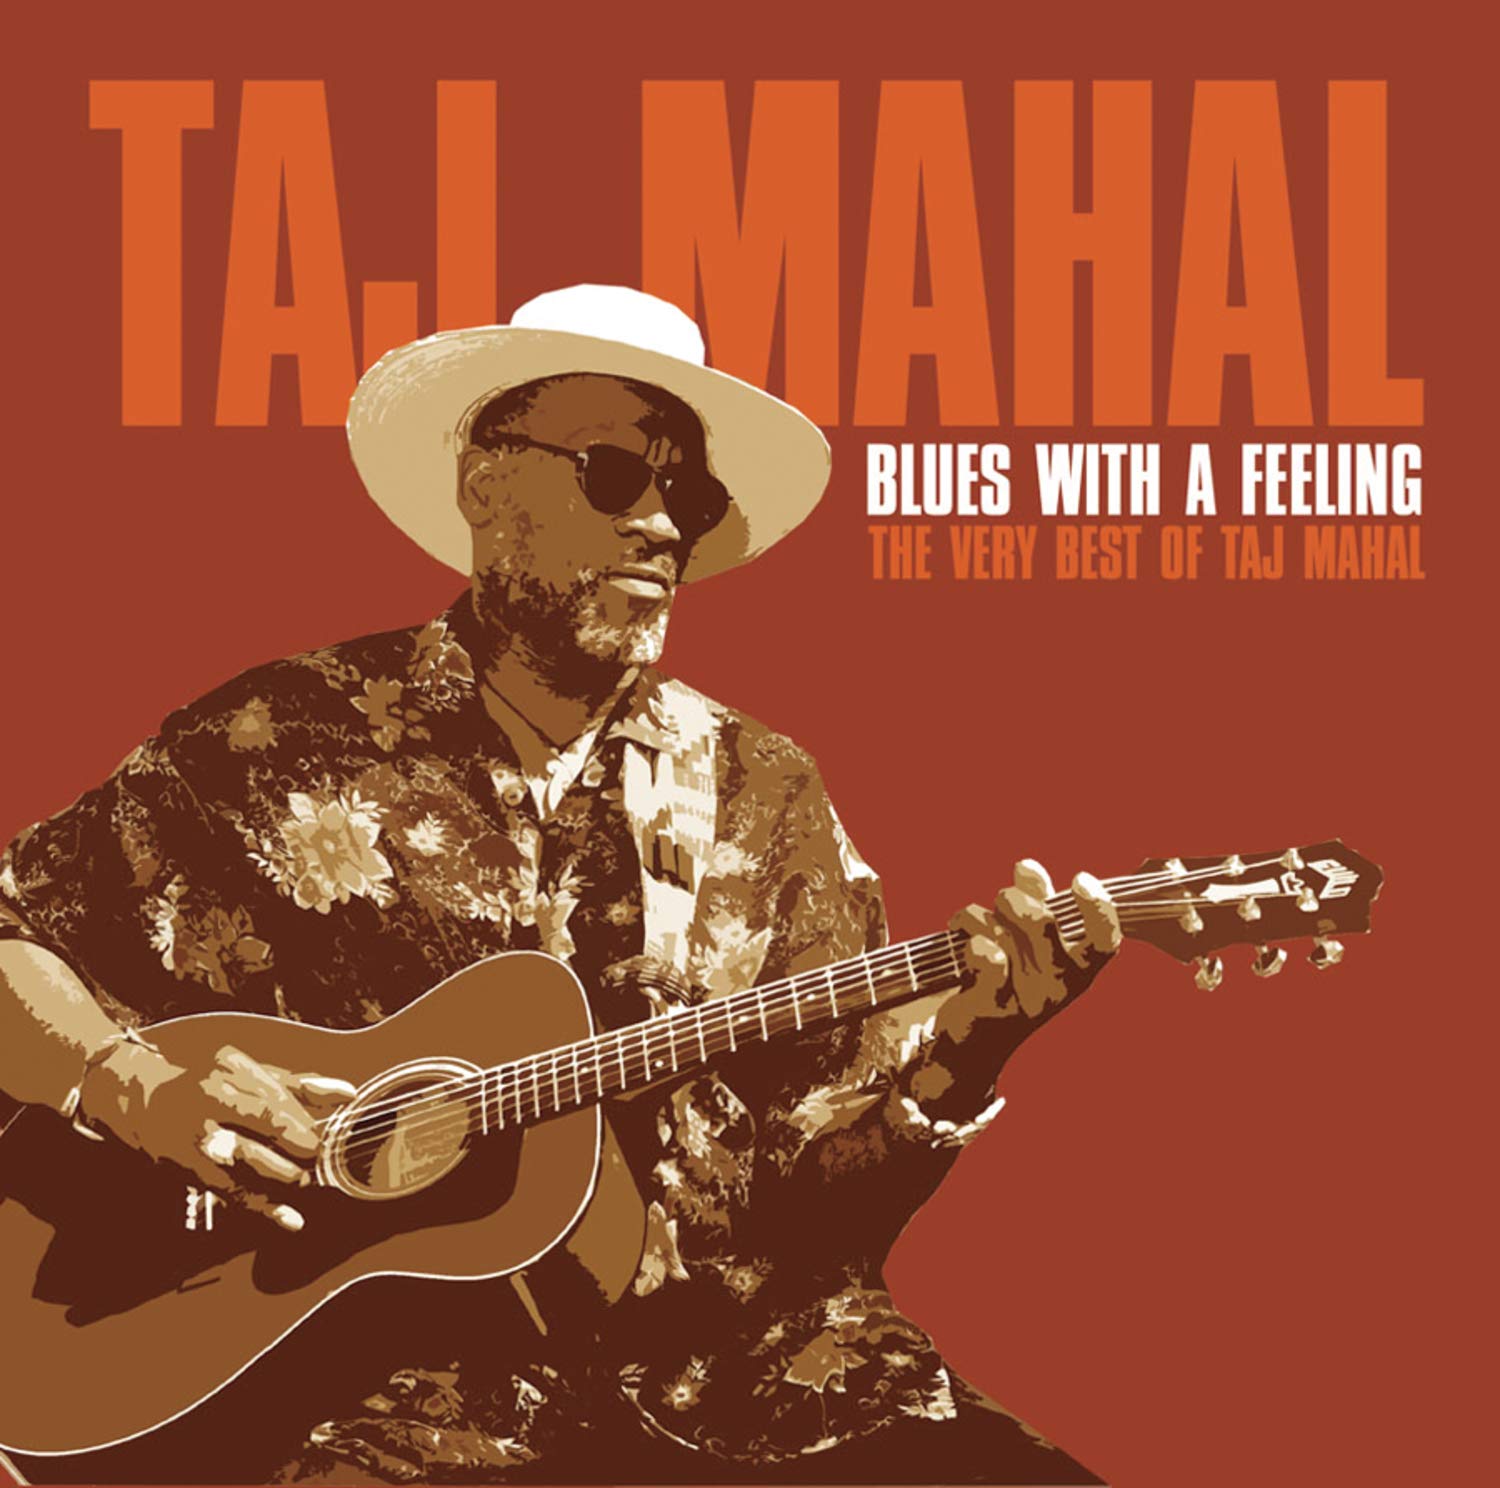 Blues With A Feeling - The Very Best of Taj Mahal